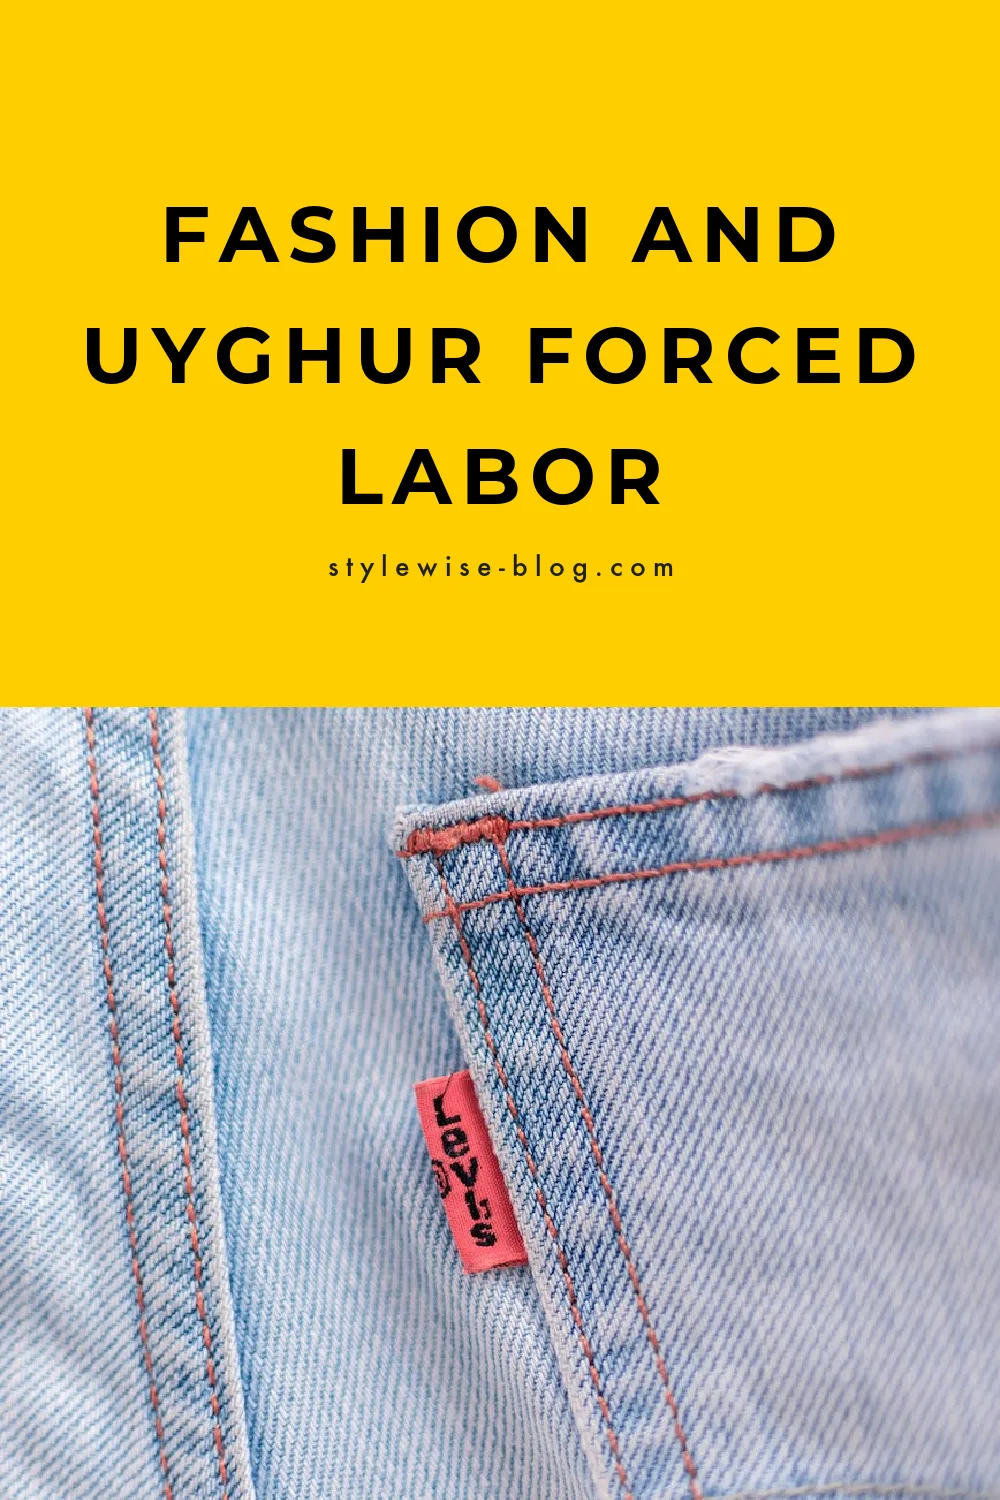 pinterest graphic with text that reads "fashion and uyghur forced labor" and image of levi's jeans